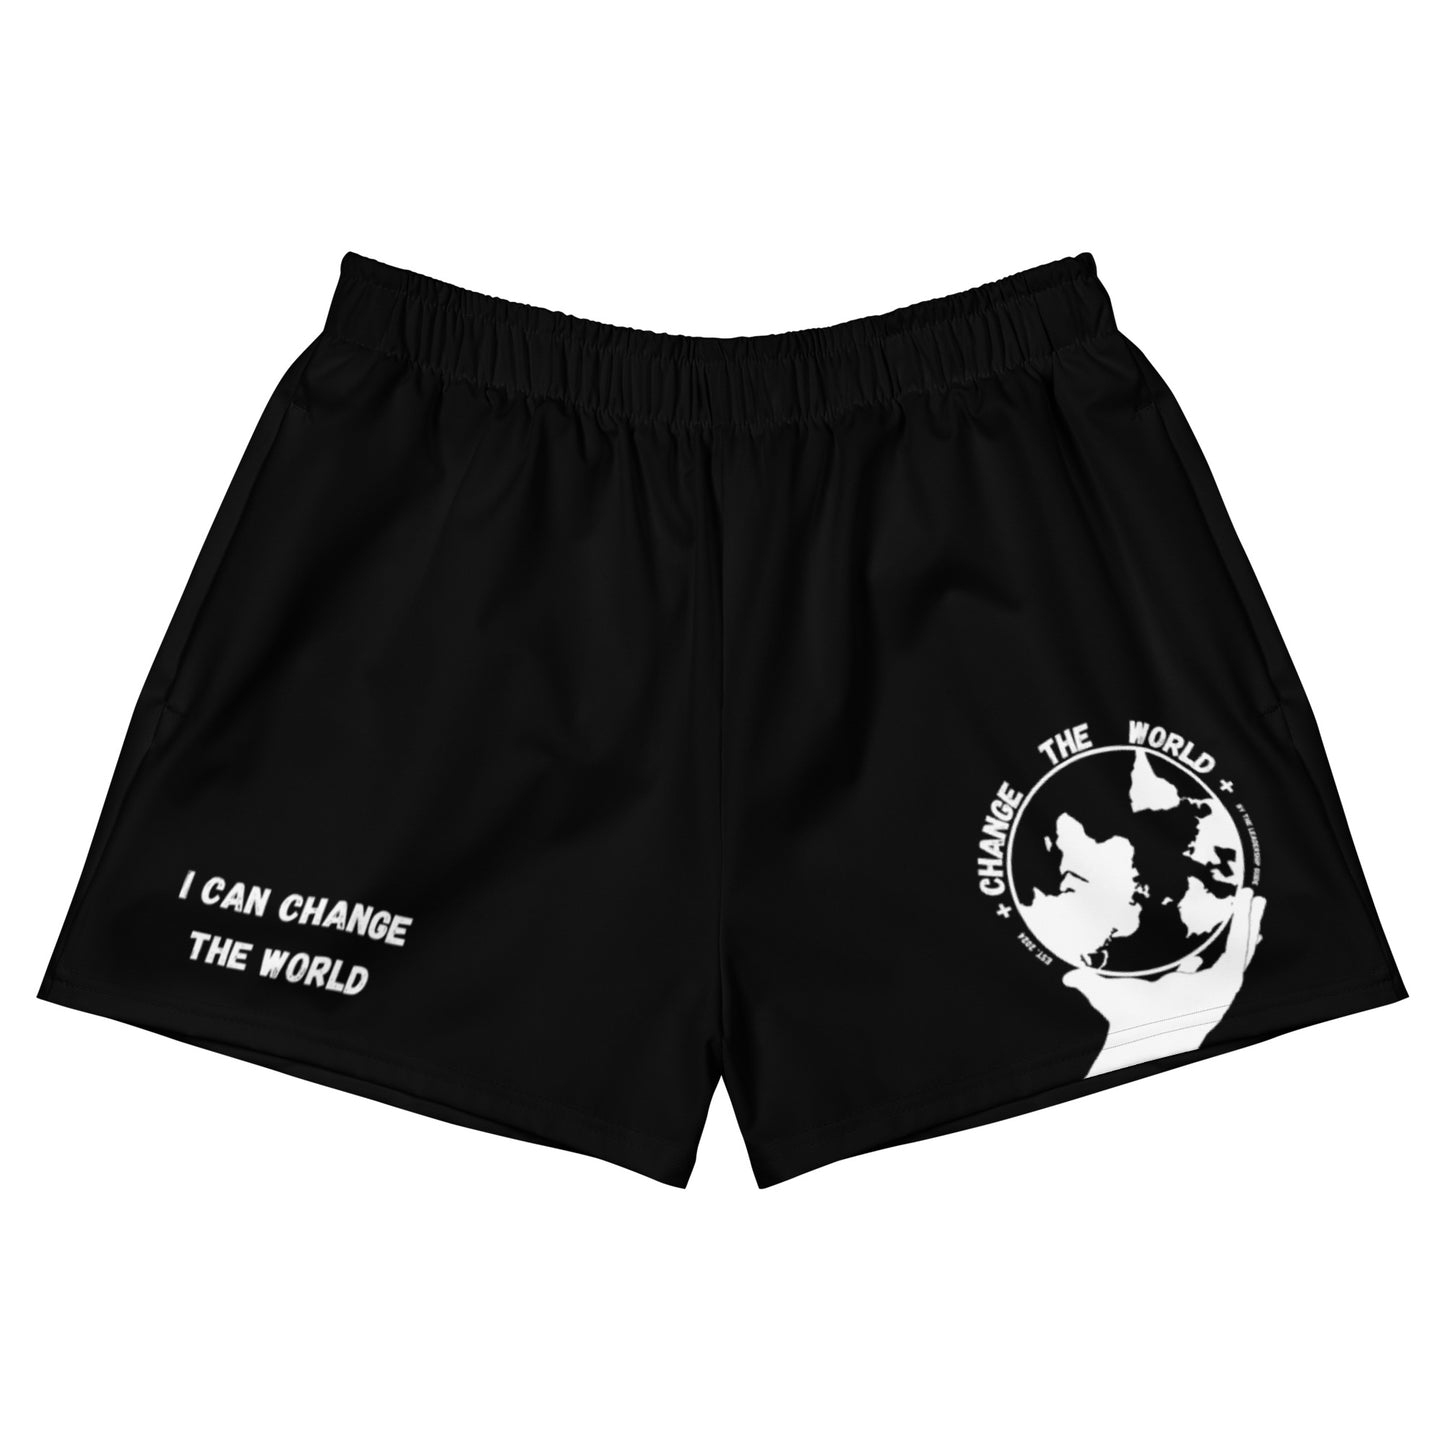 I Can Change The World - Black Women’s Recycled Athletic Shorts